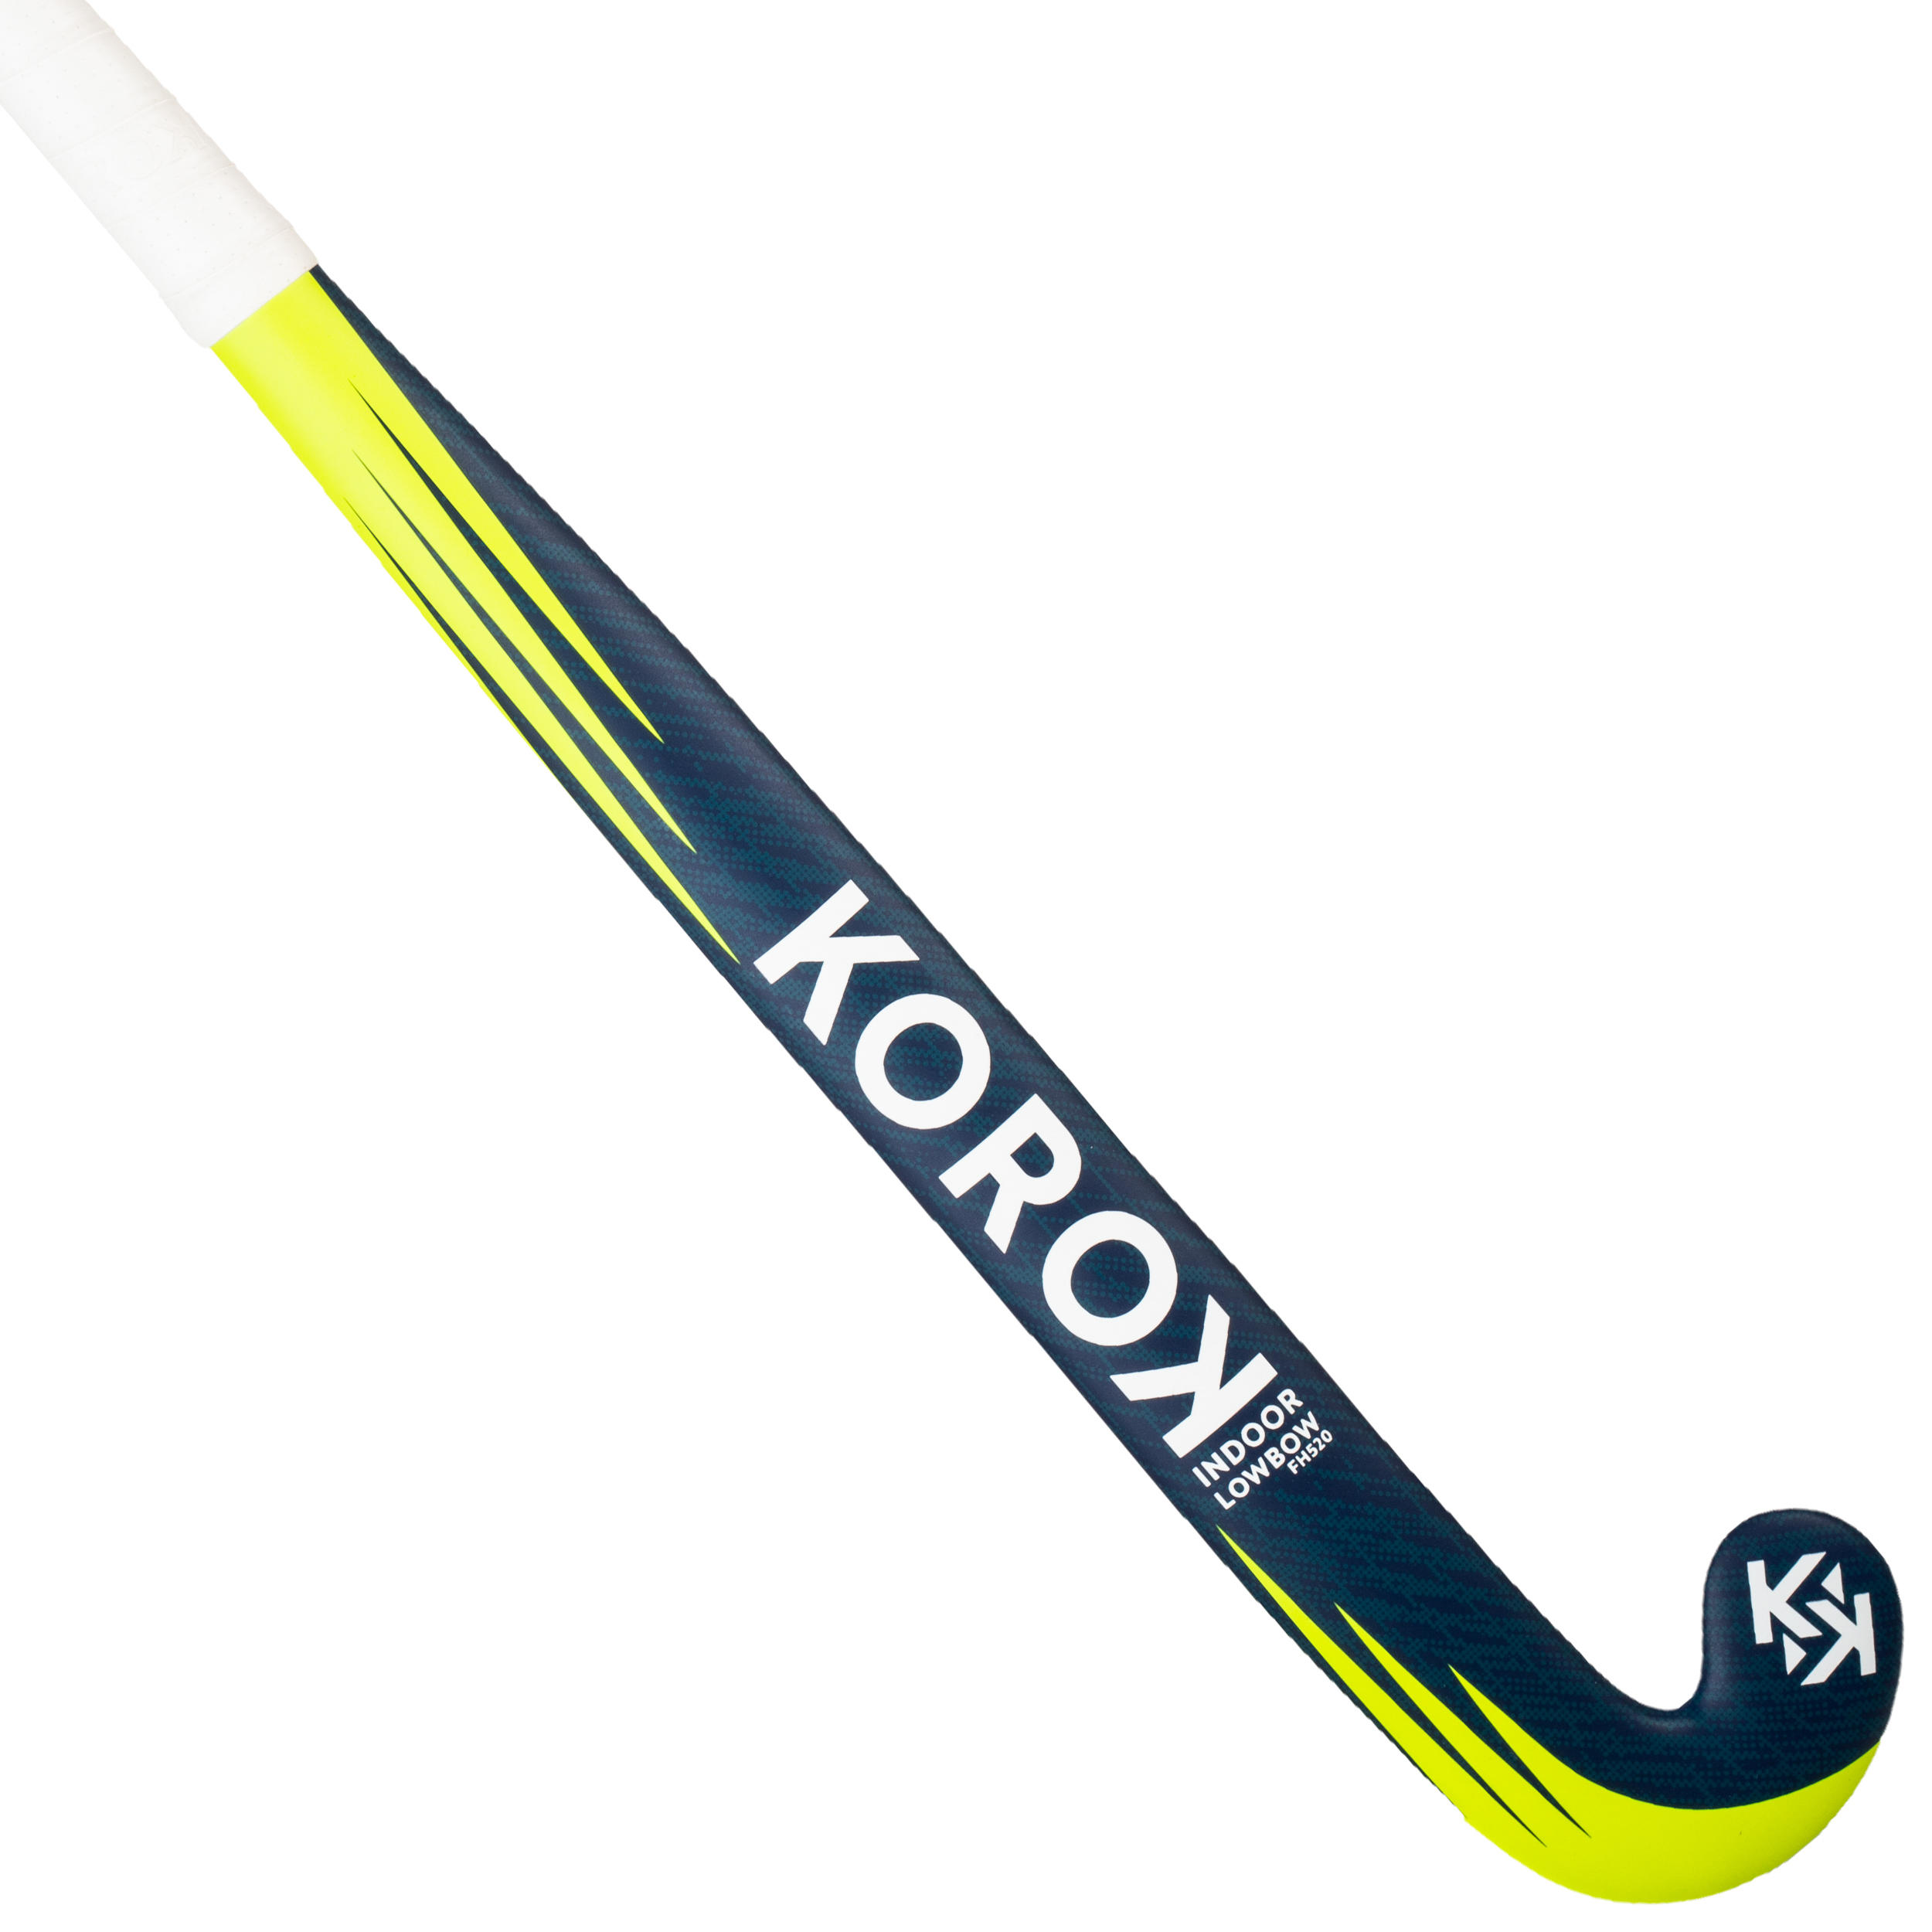 Adult Intermediate 20% Carbon Low Bow Indoor Hockey Stick FH520 - Blue/Yellow 1/10